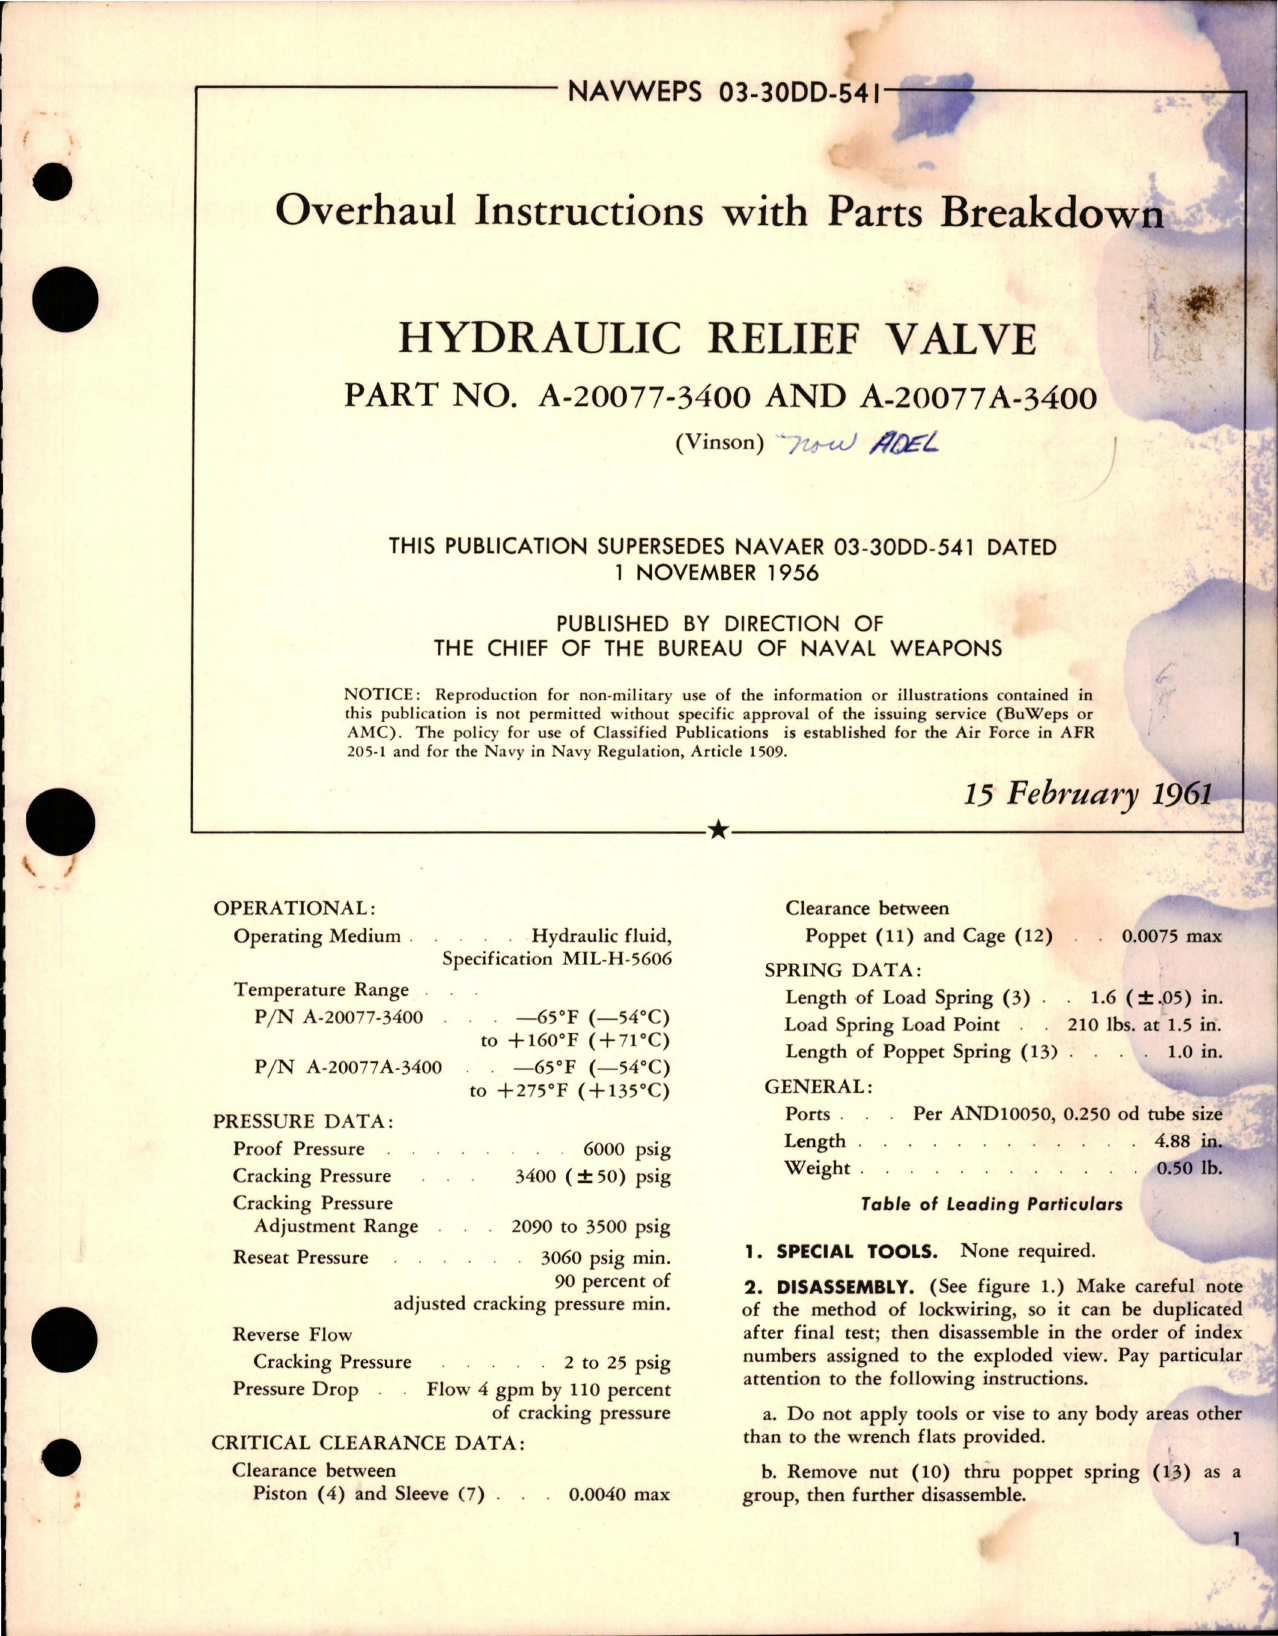 Sample page 1 from AirCorps Library document: Overhaul Instructions with Parts Breakdown for Hydraulic Relief Valve - Part A-20077-3400 and A-20077A-3400